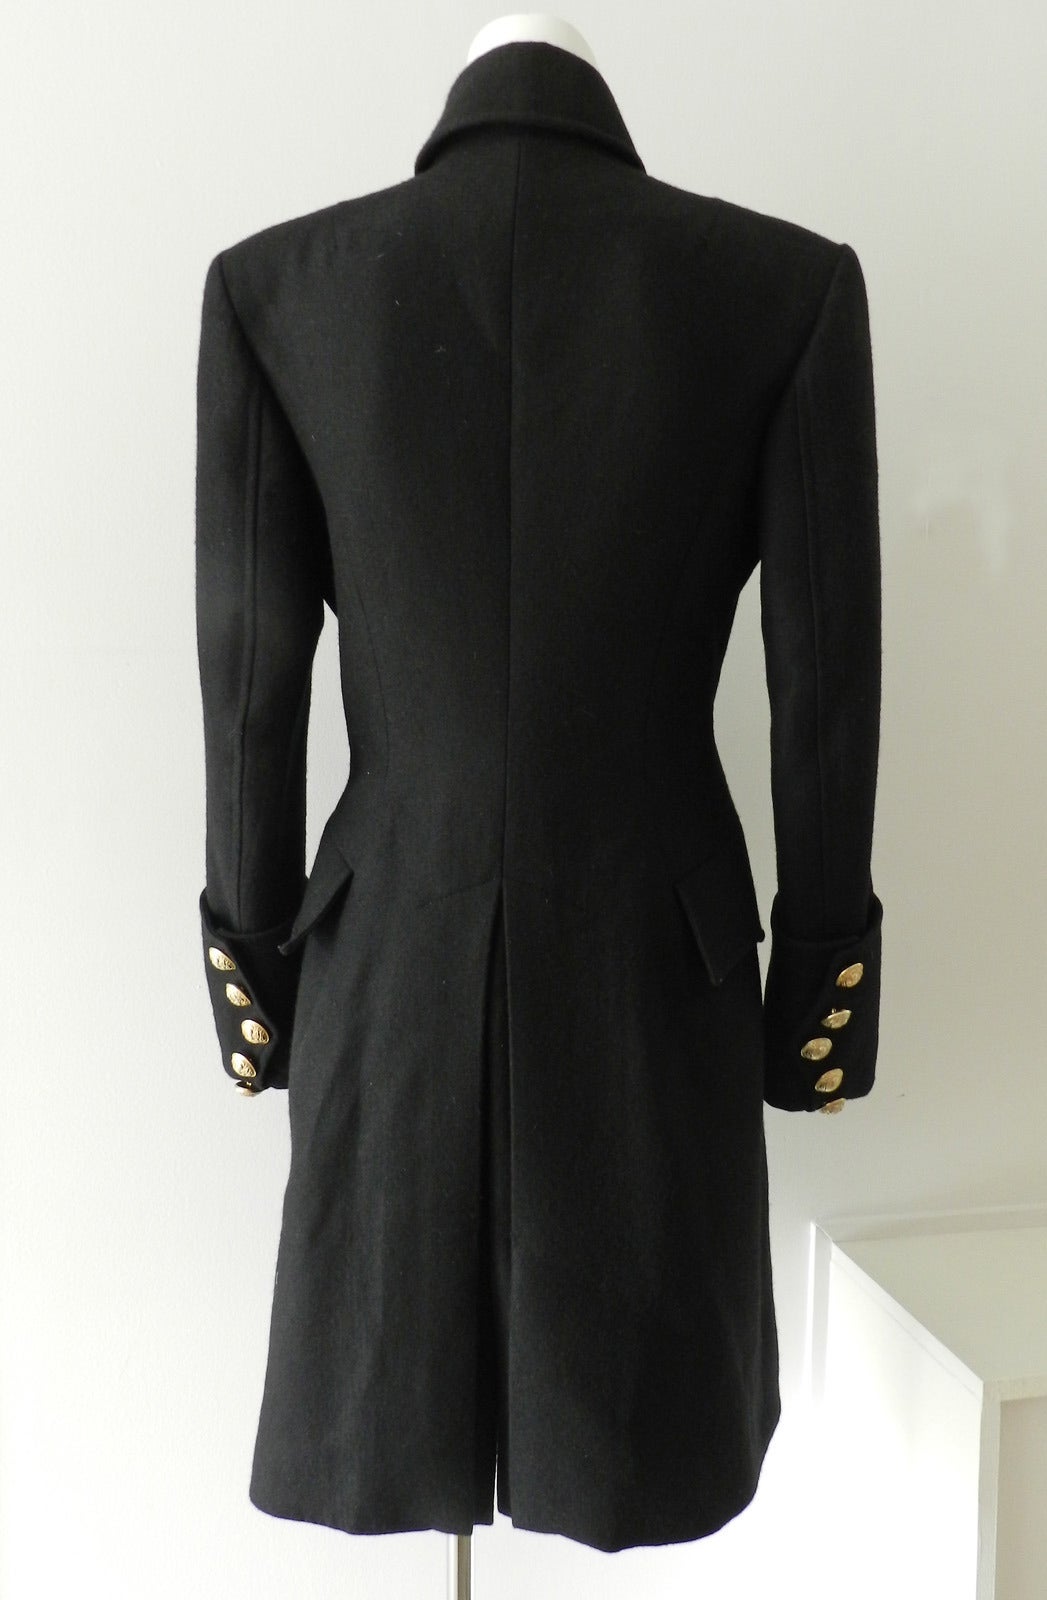 Women's Balmain Black Wool Military Coat with Gold Buttons